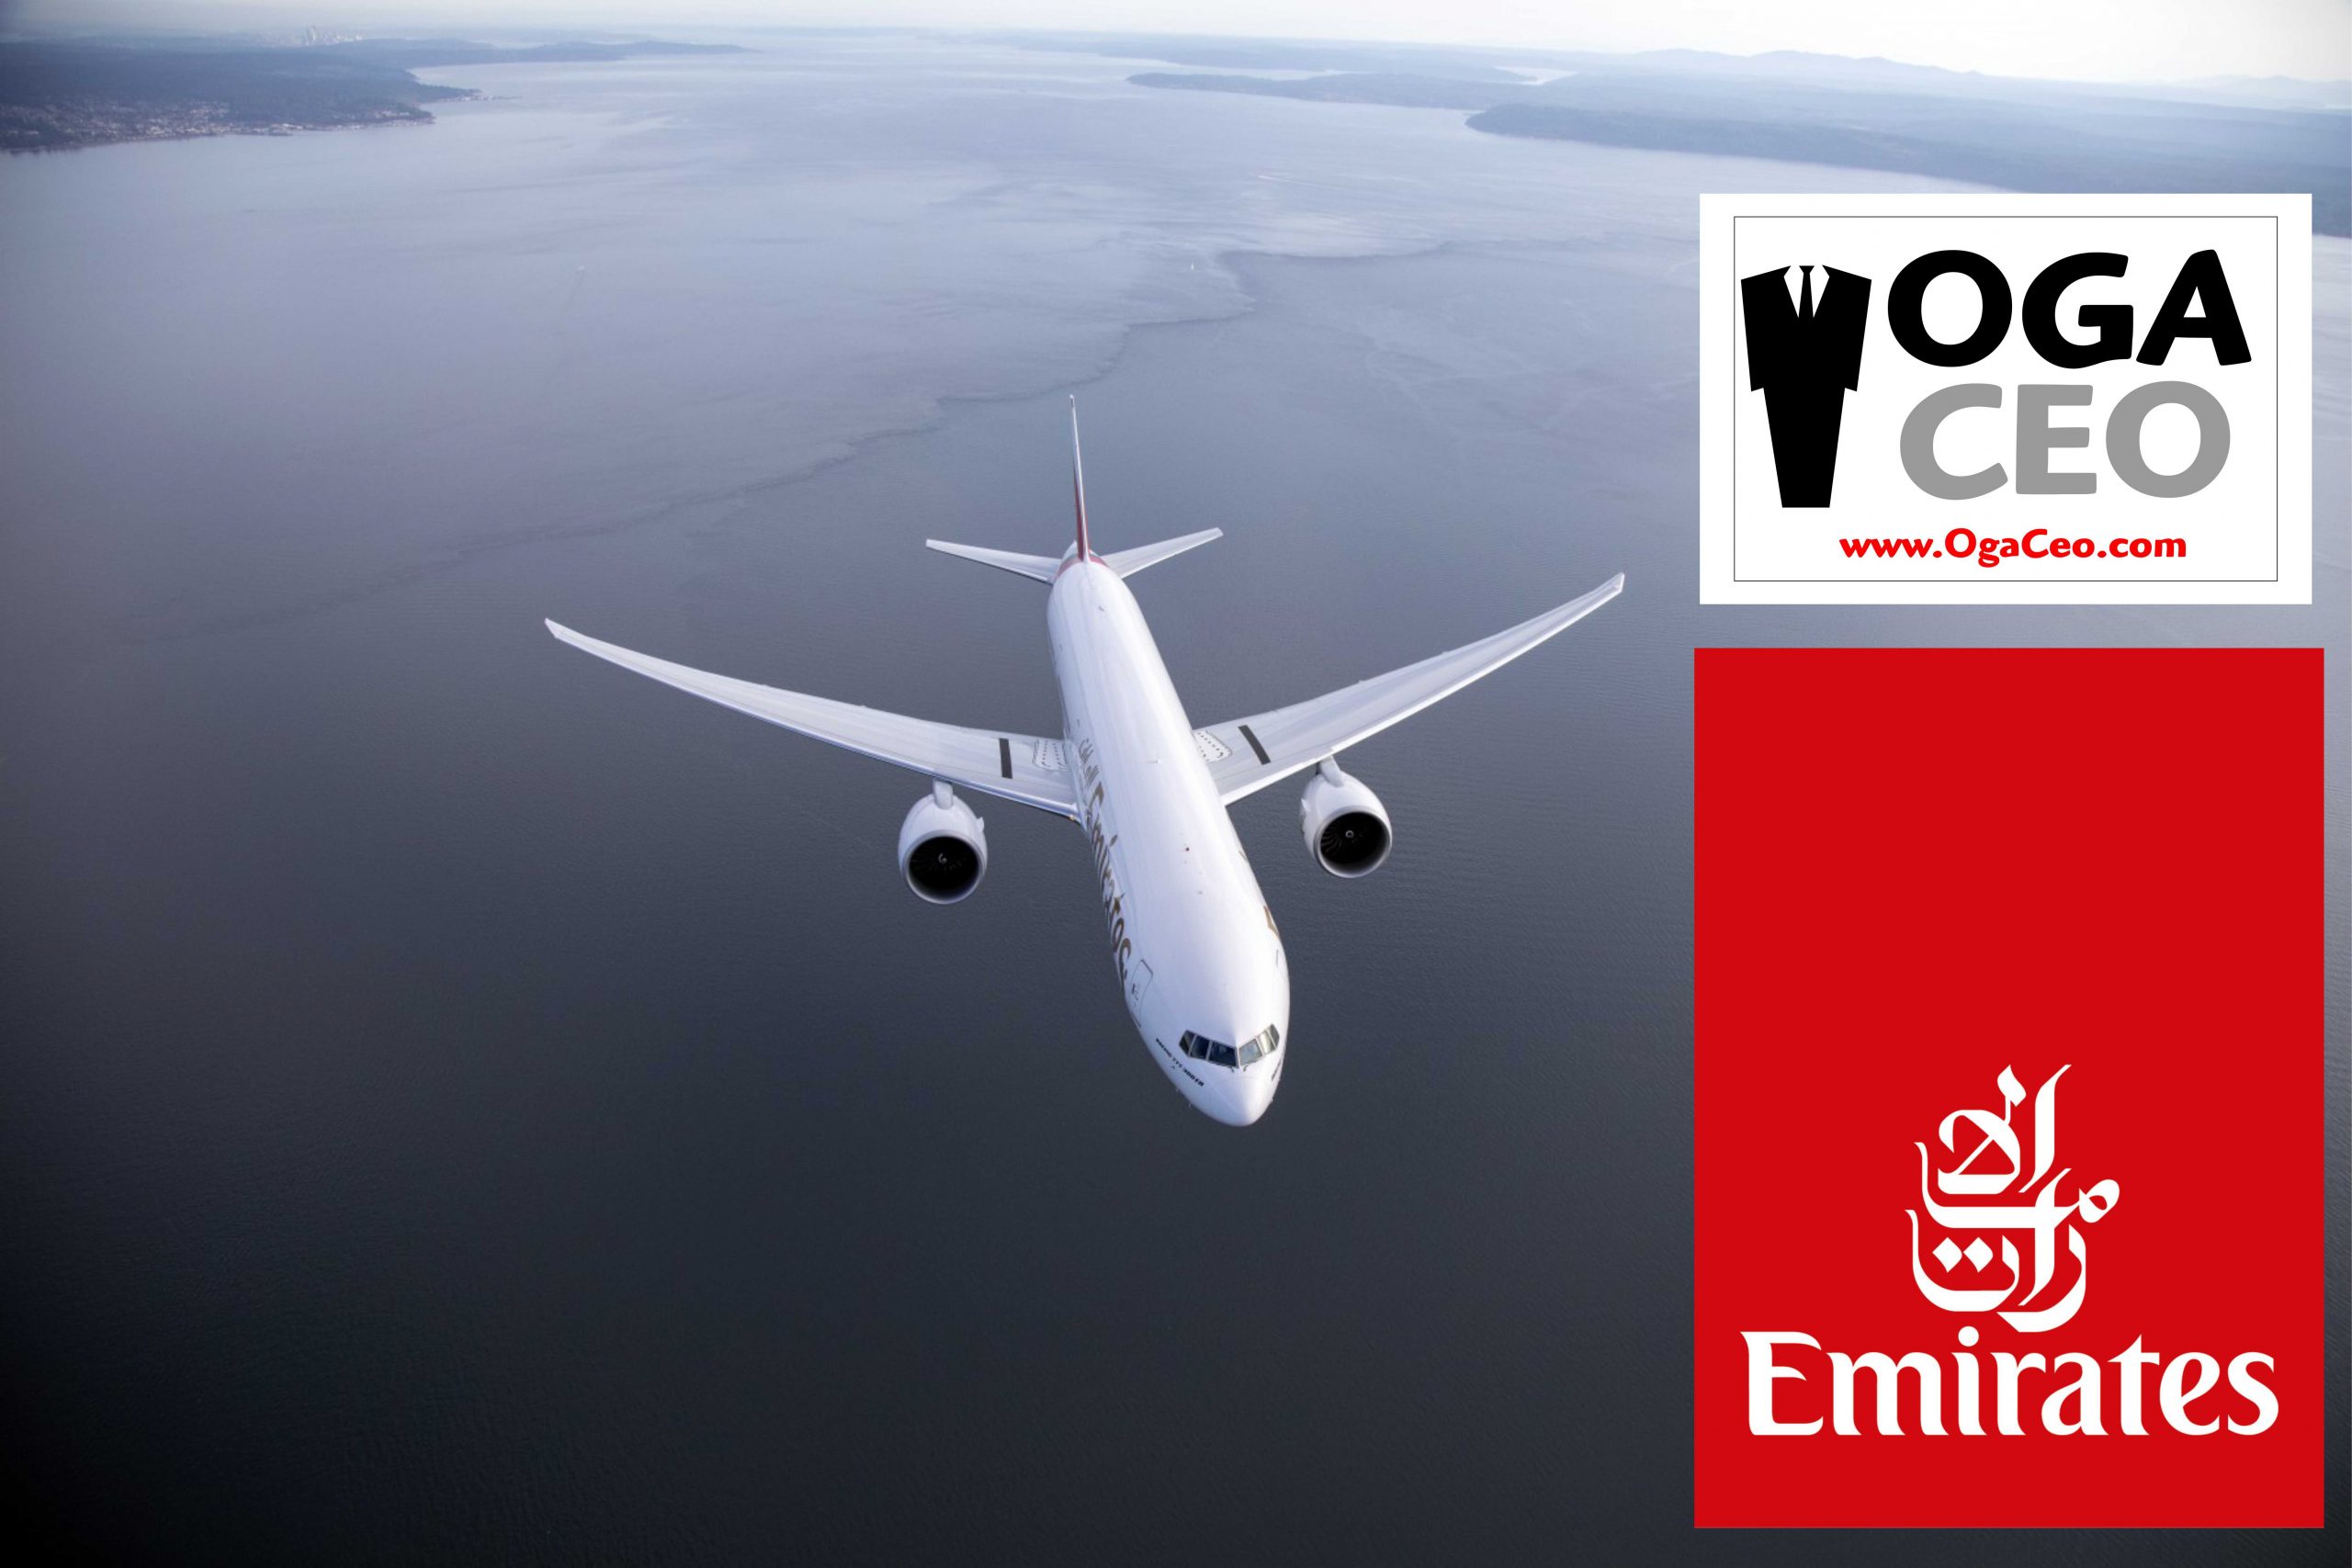 Emirates Airline Returned over 1.4 billion USD in COVID-19 related travel refunds